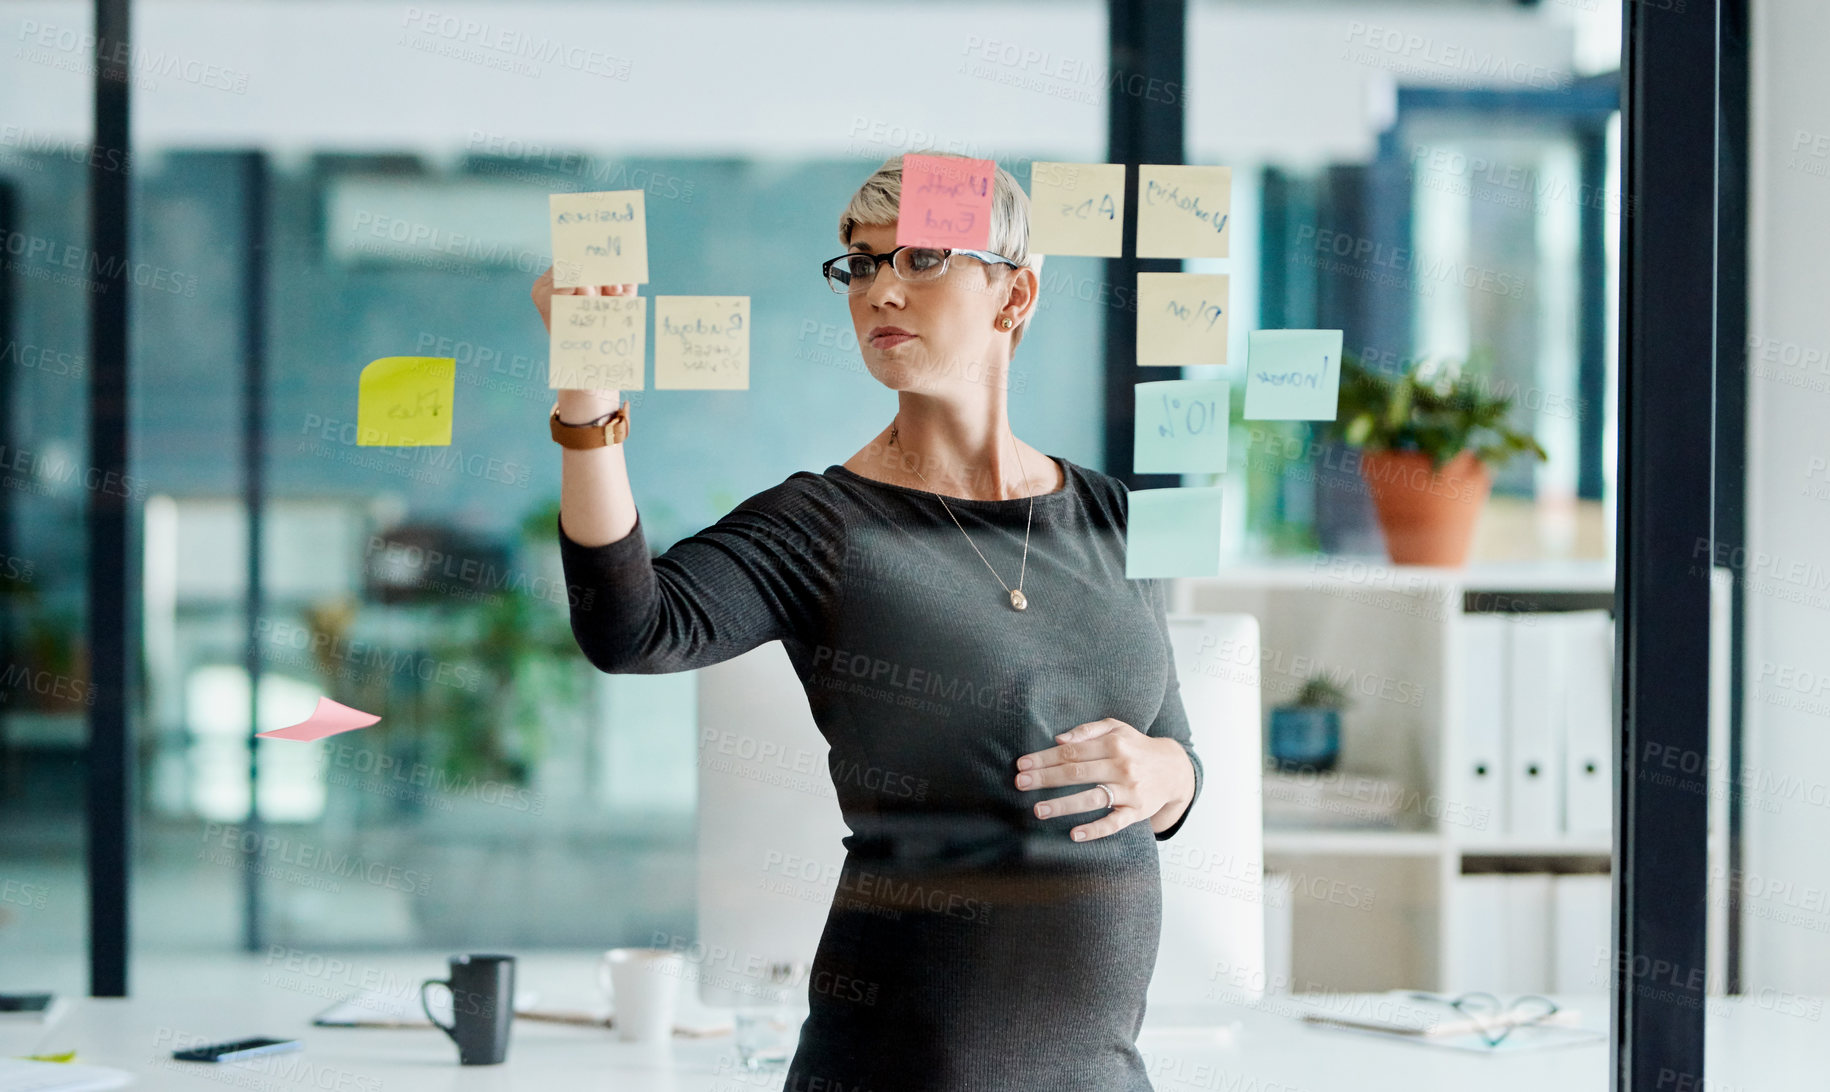 Buy stock photo Shot of a pregnant businesswoman brainstorming with notes on a glass wall in an office